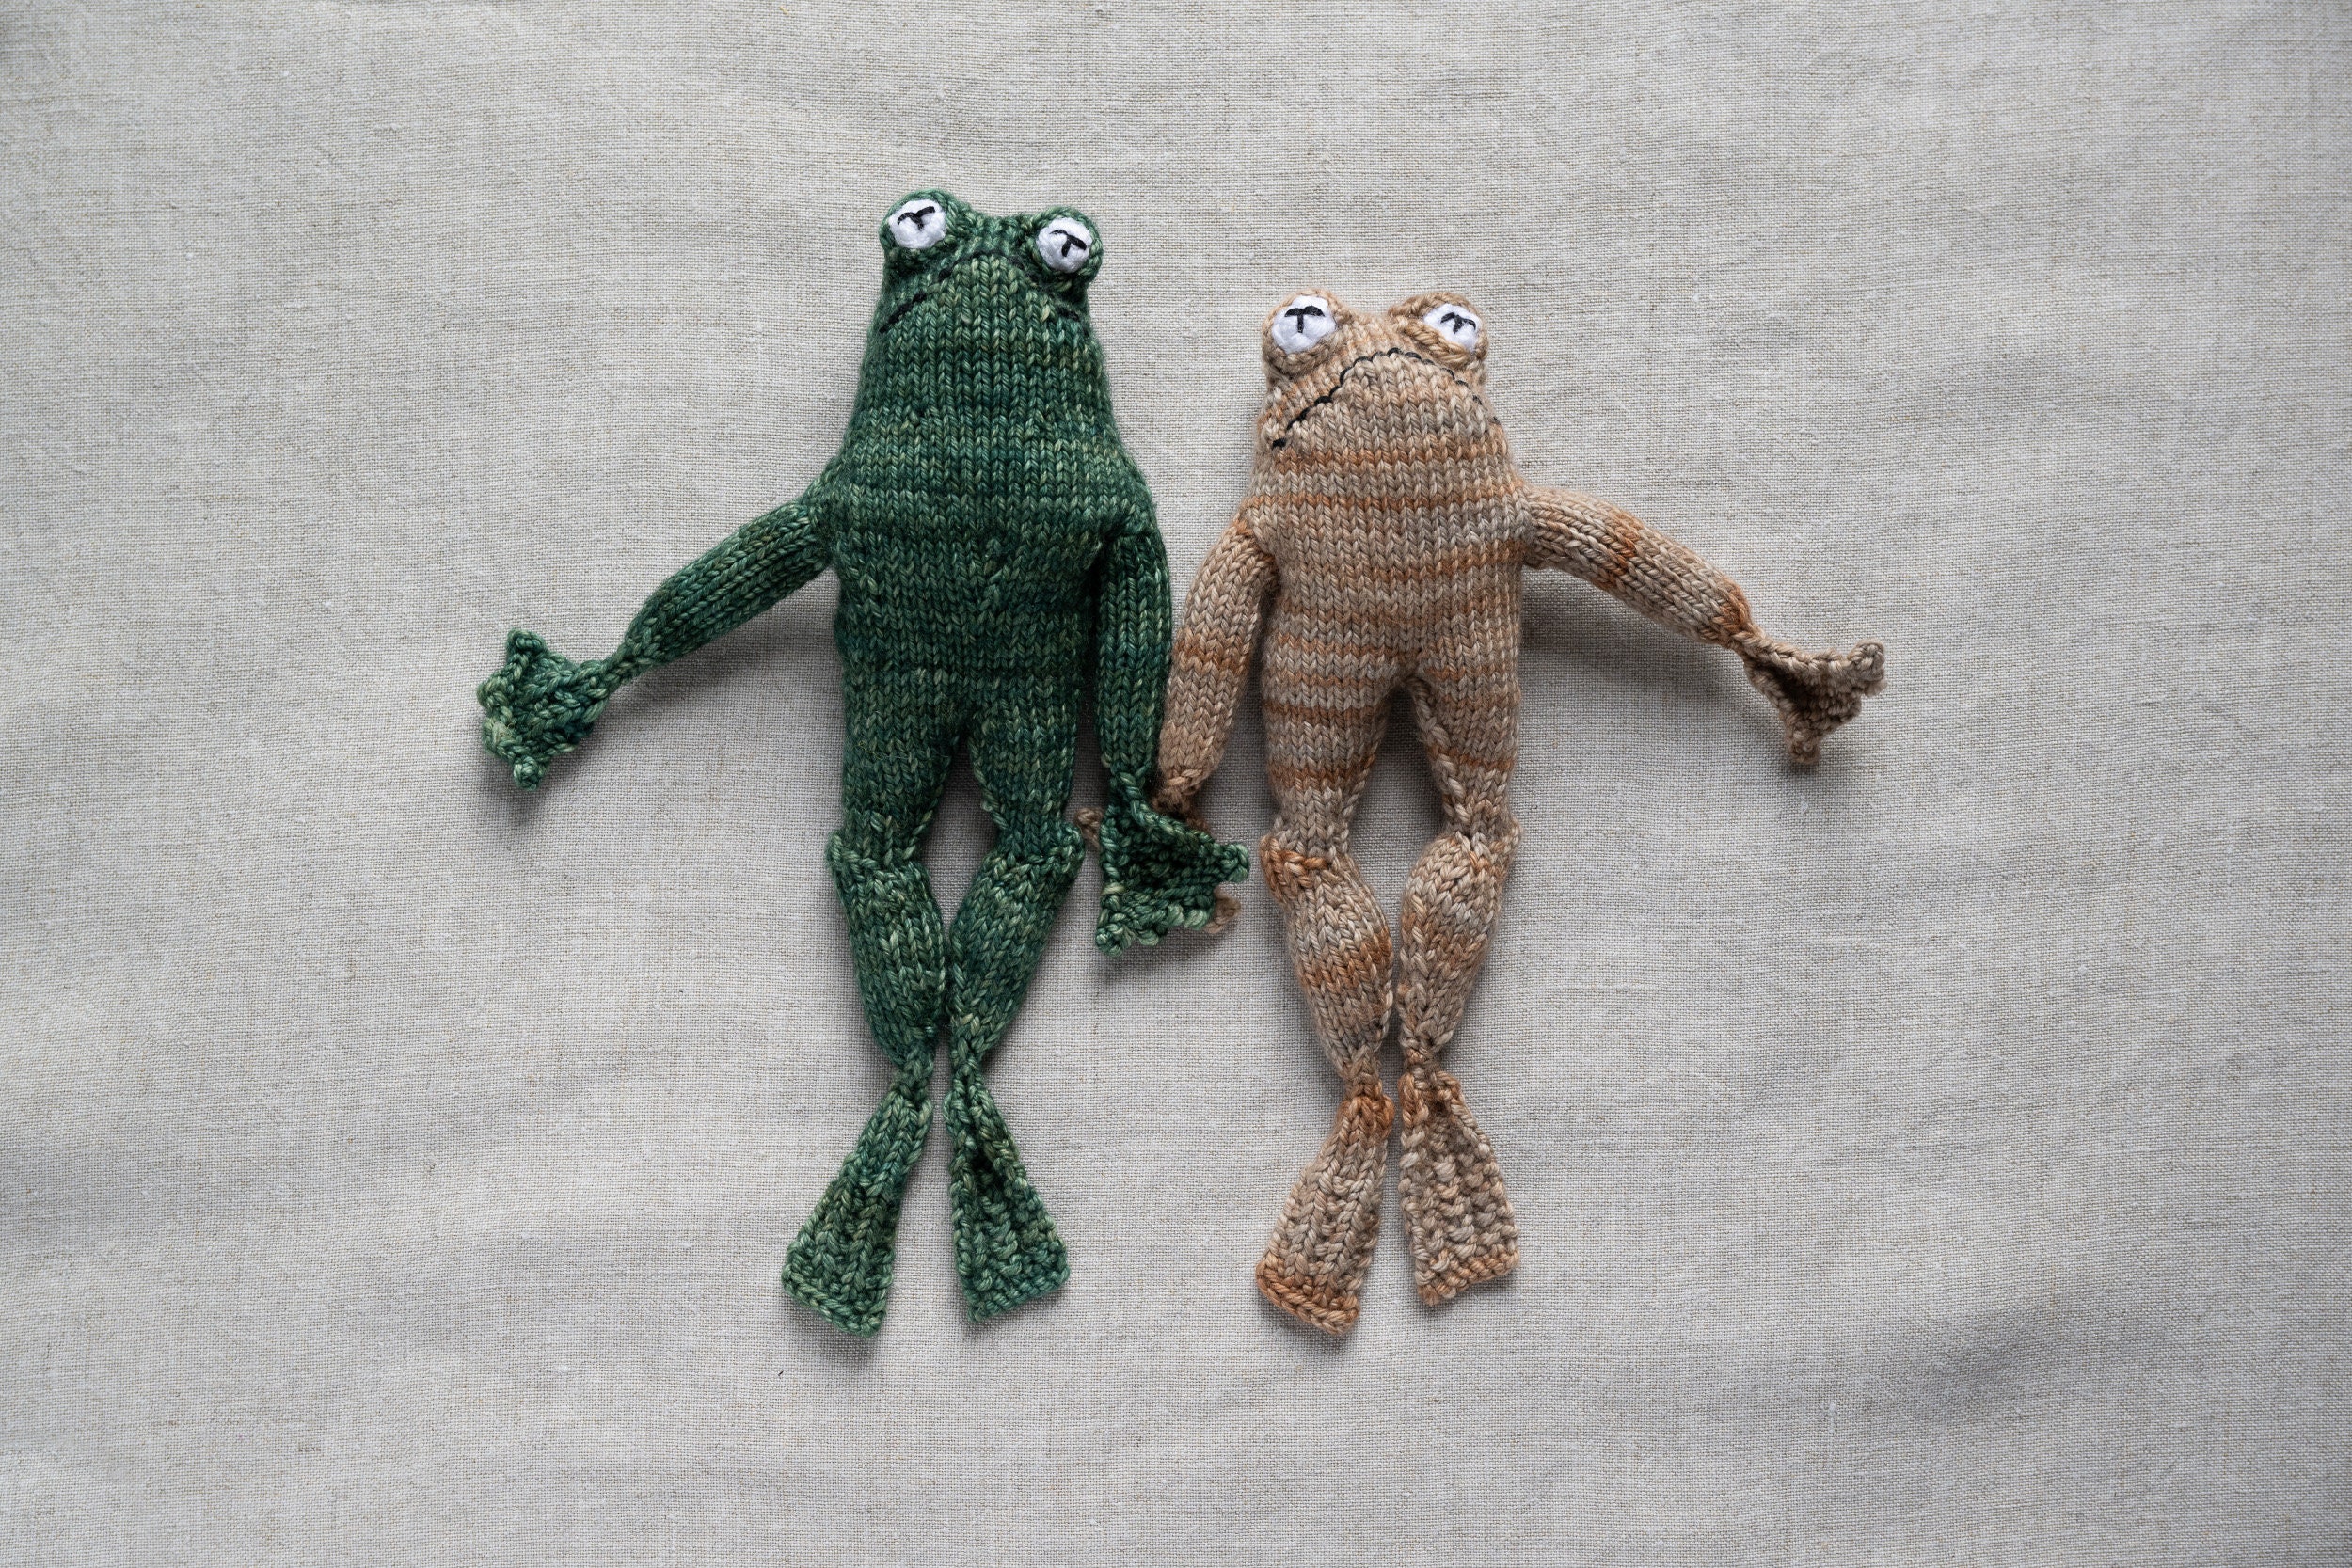 Nostalgic Knitting Pattern Inspired by the Frog and Toad Children's Books